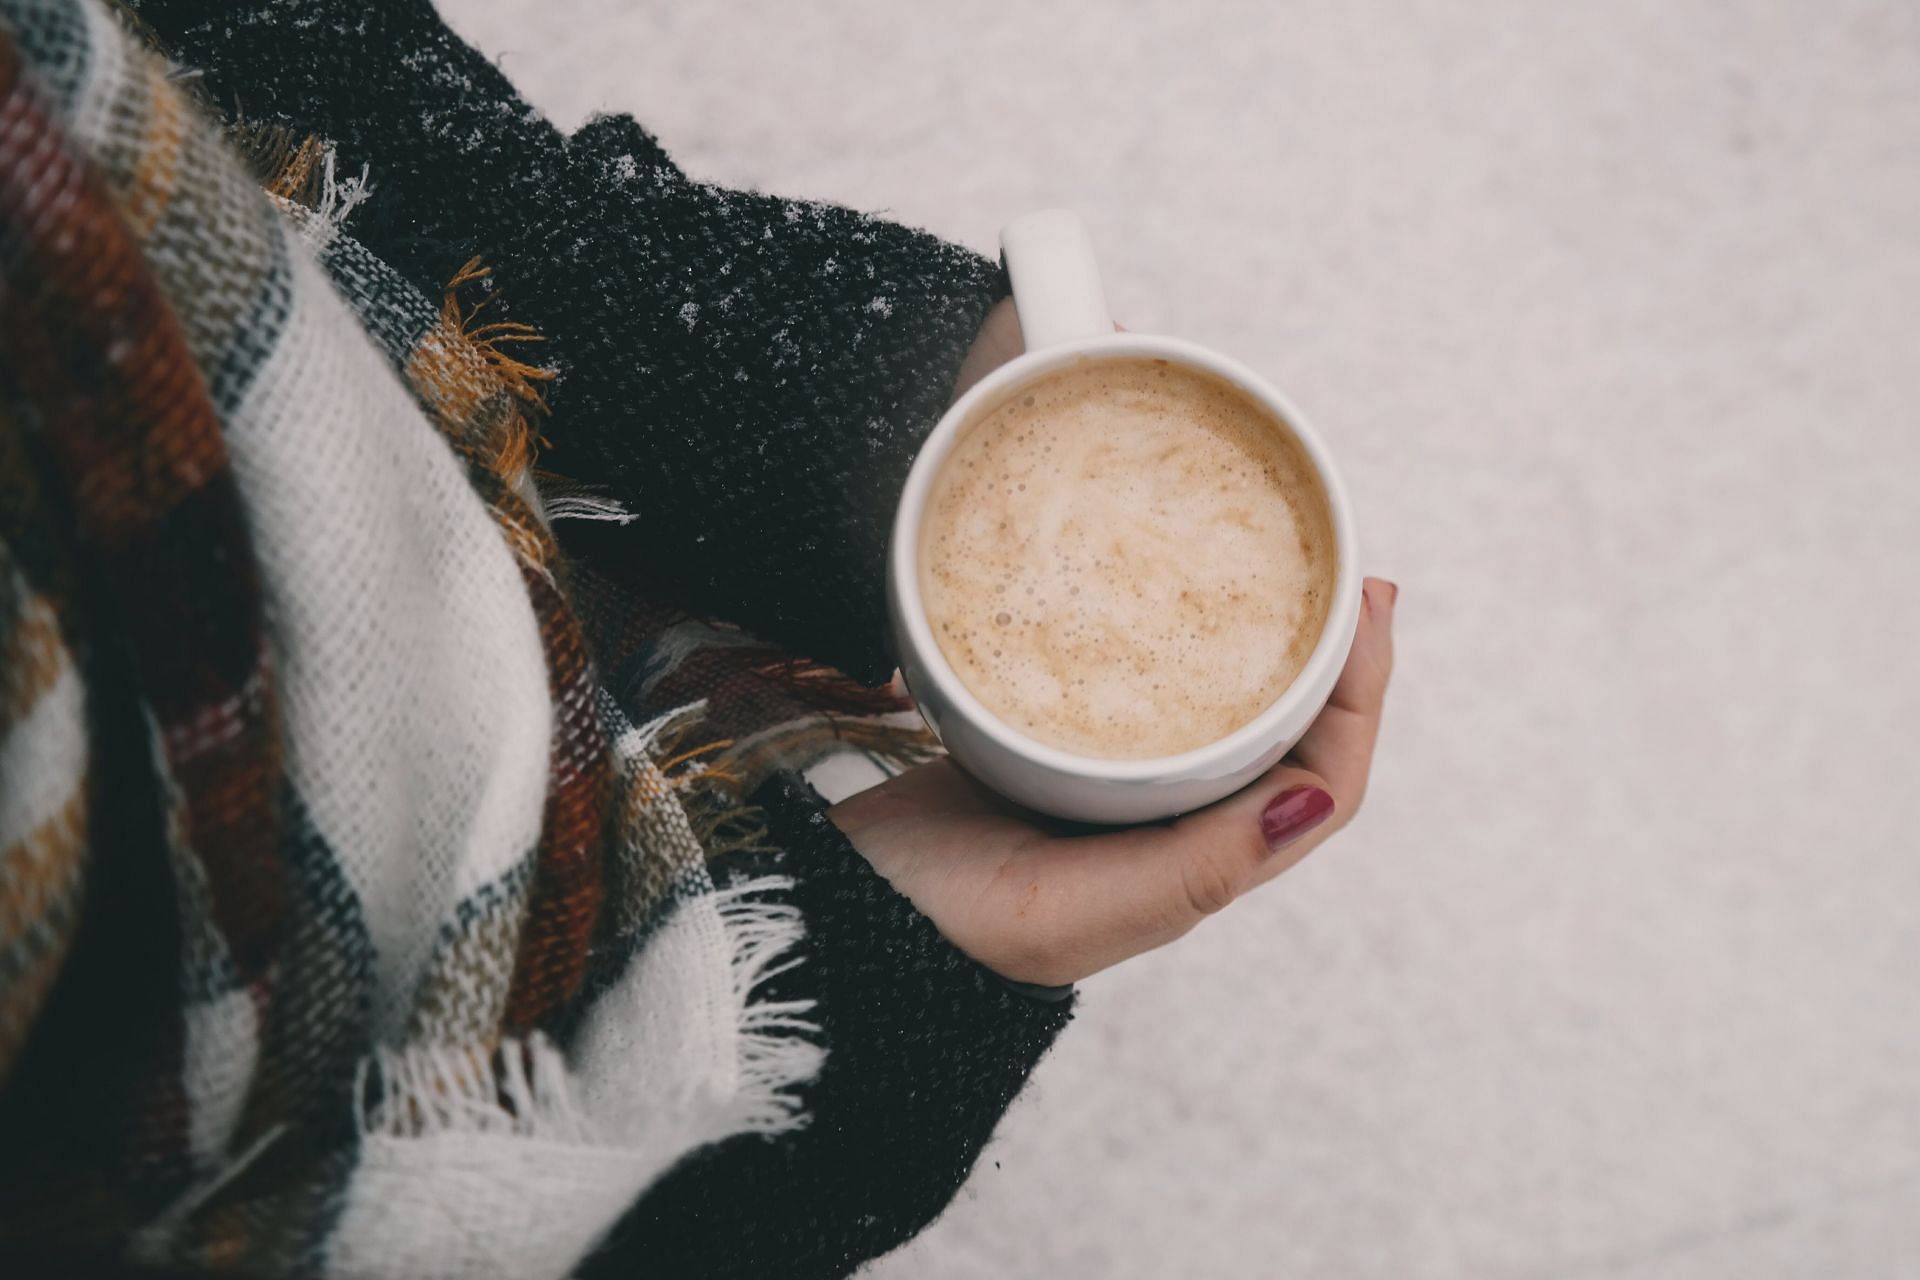 Heart attacks in cold weather (image sourced via Pexels / Photo by Brigitte)